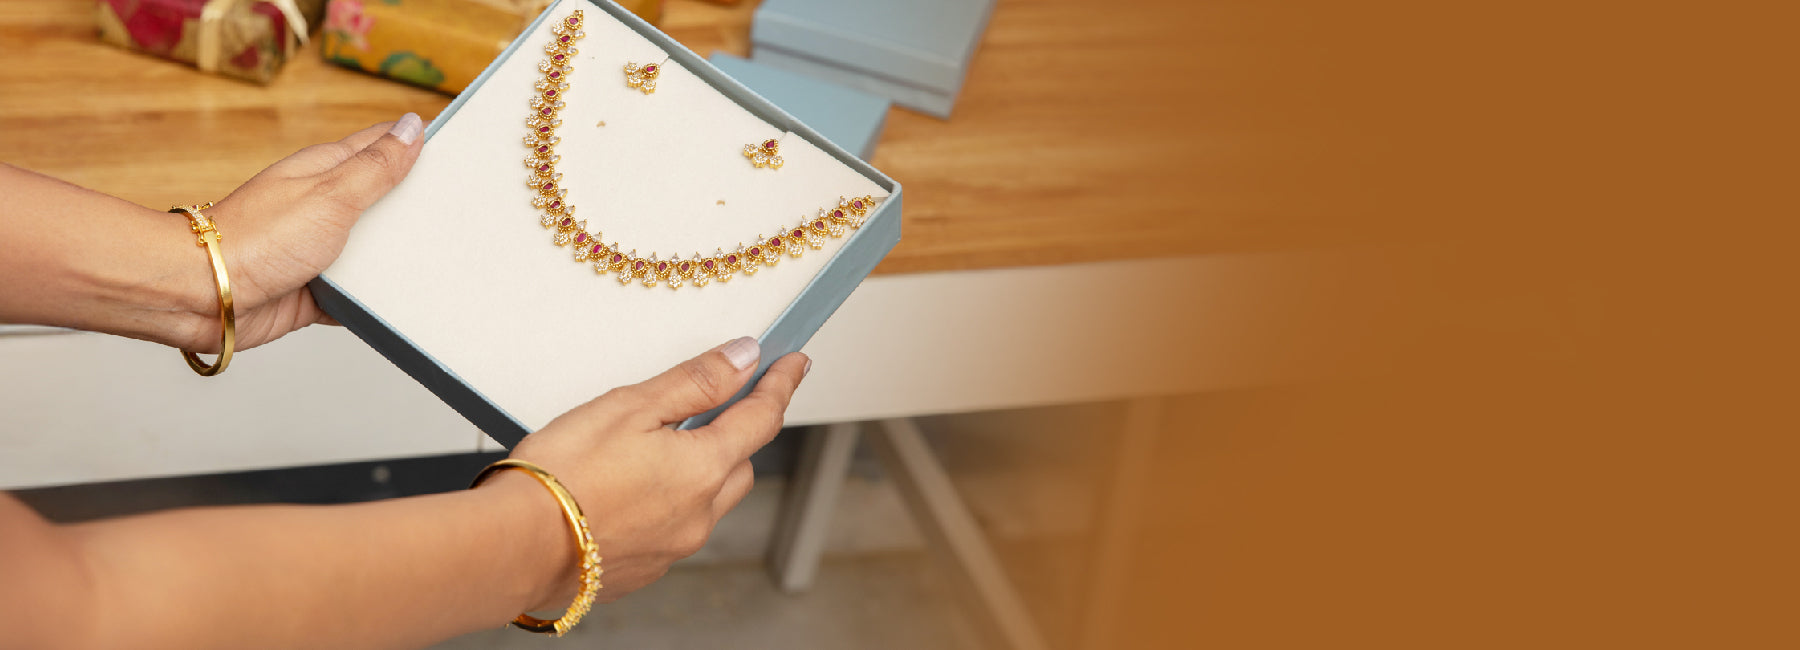 How to Care for Your Indian Jewelry? A Practical Guide to Indian Jewelry Preservation 